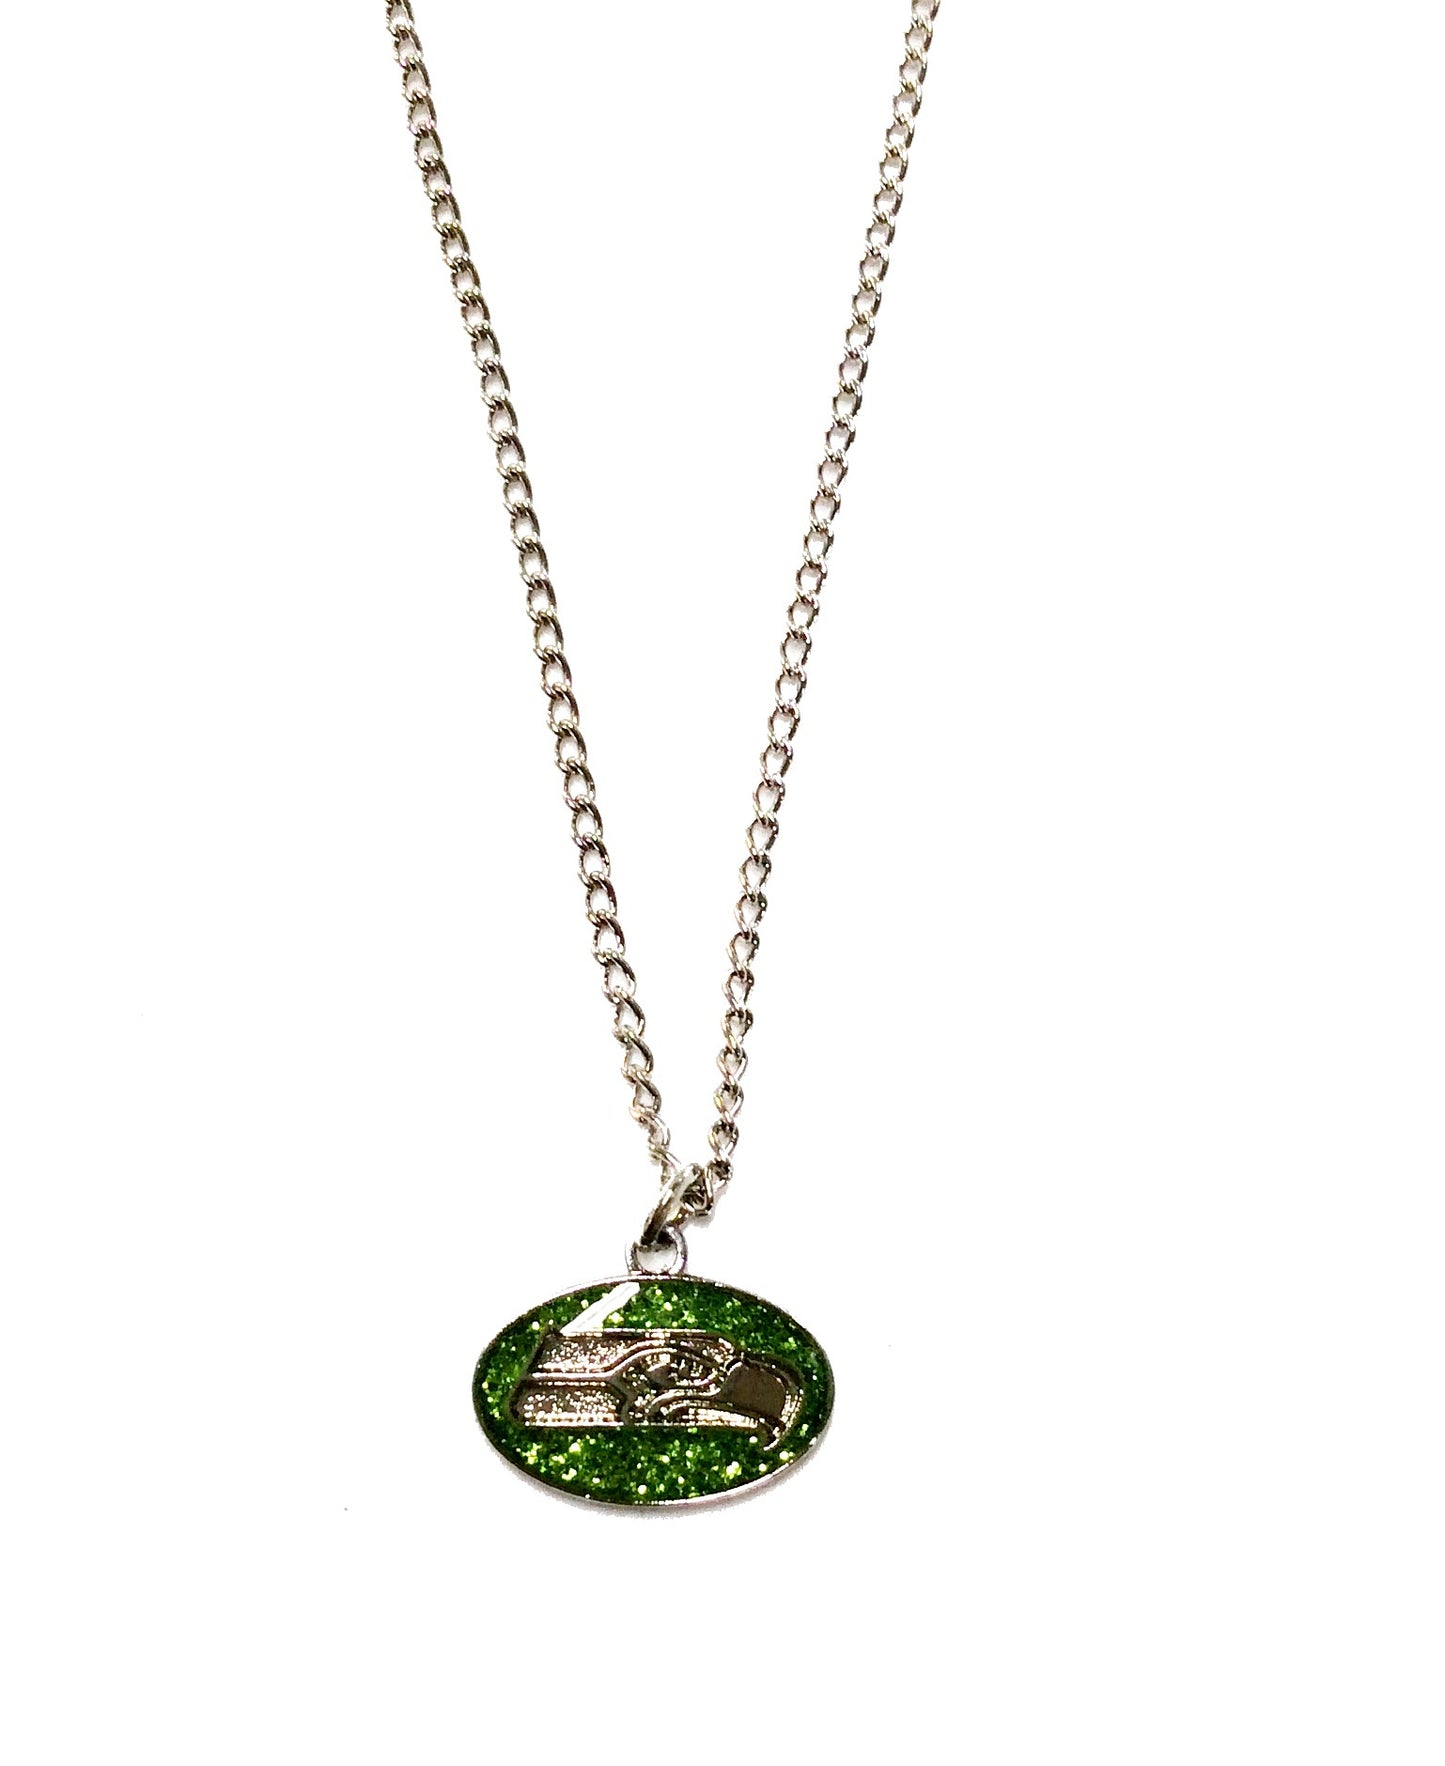 SEAHAWKS SPARKLY LOGO Necklace #94-7175